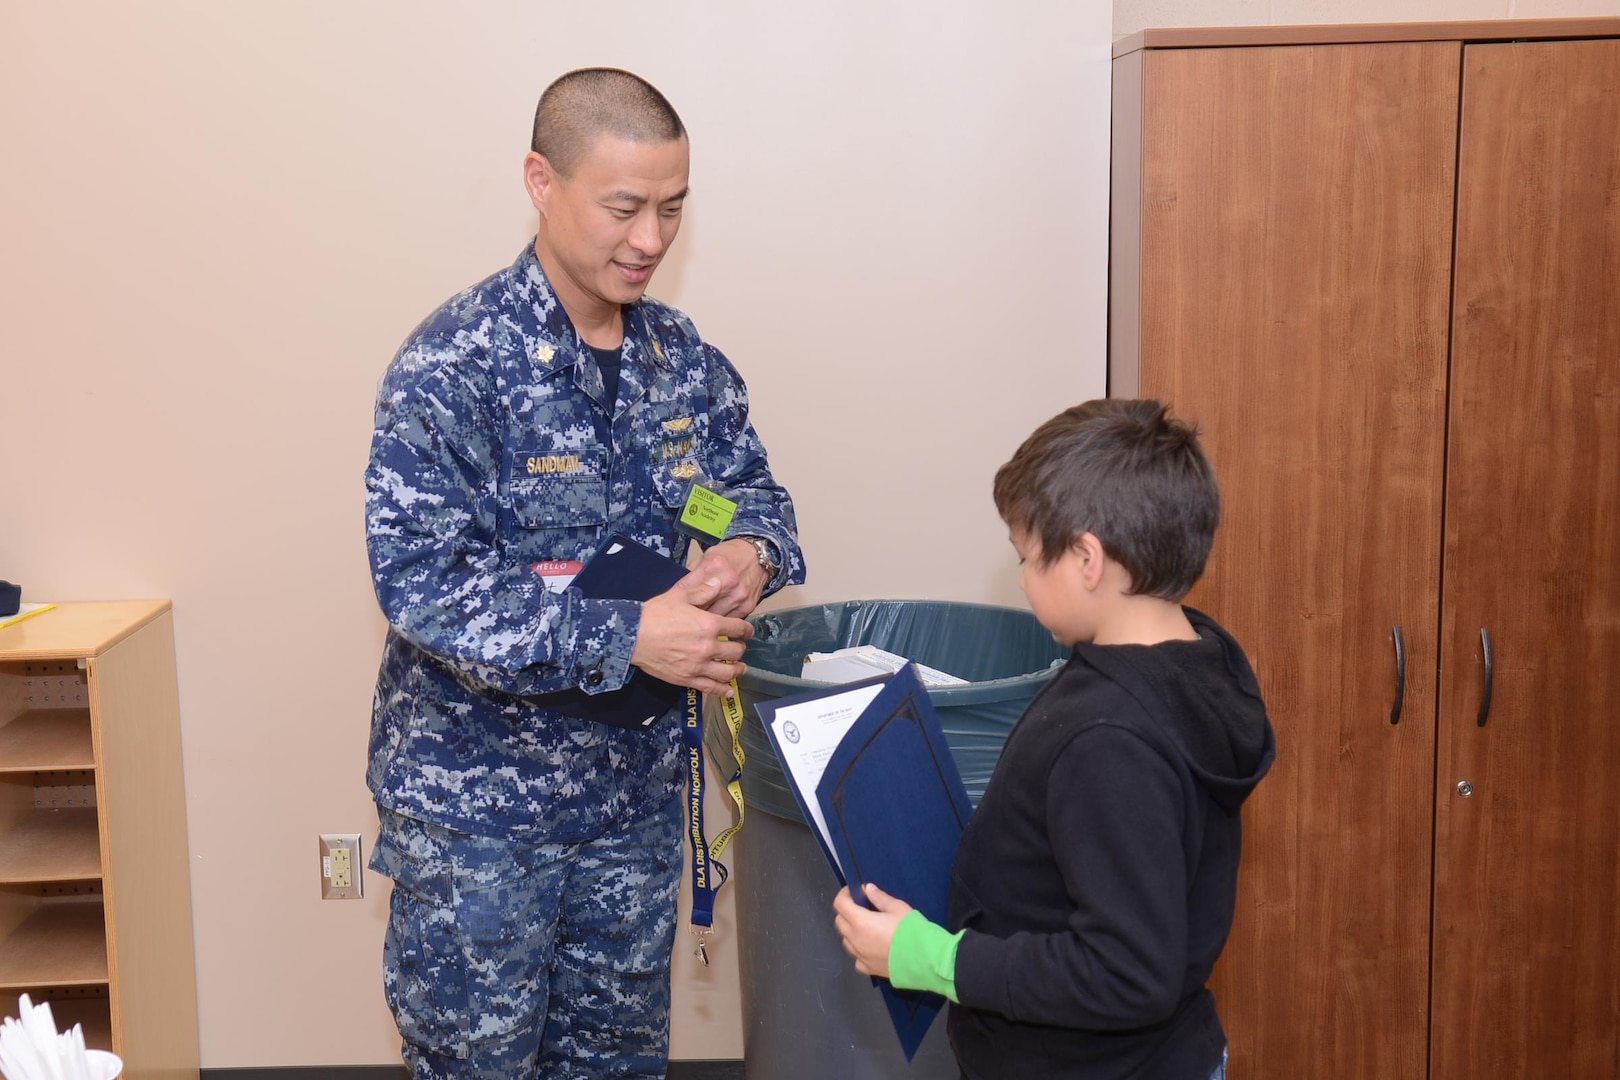 Navy Lt. Cmdr. Brett Sandman, assistant site director of DLA Distribution Norfolk, Va., at New London, Conn., presents a certificate to a Northeast Academy student during the recent Groton ROCKS program.